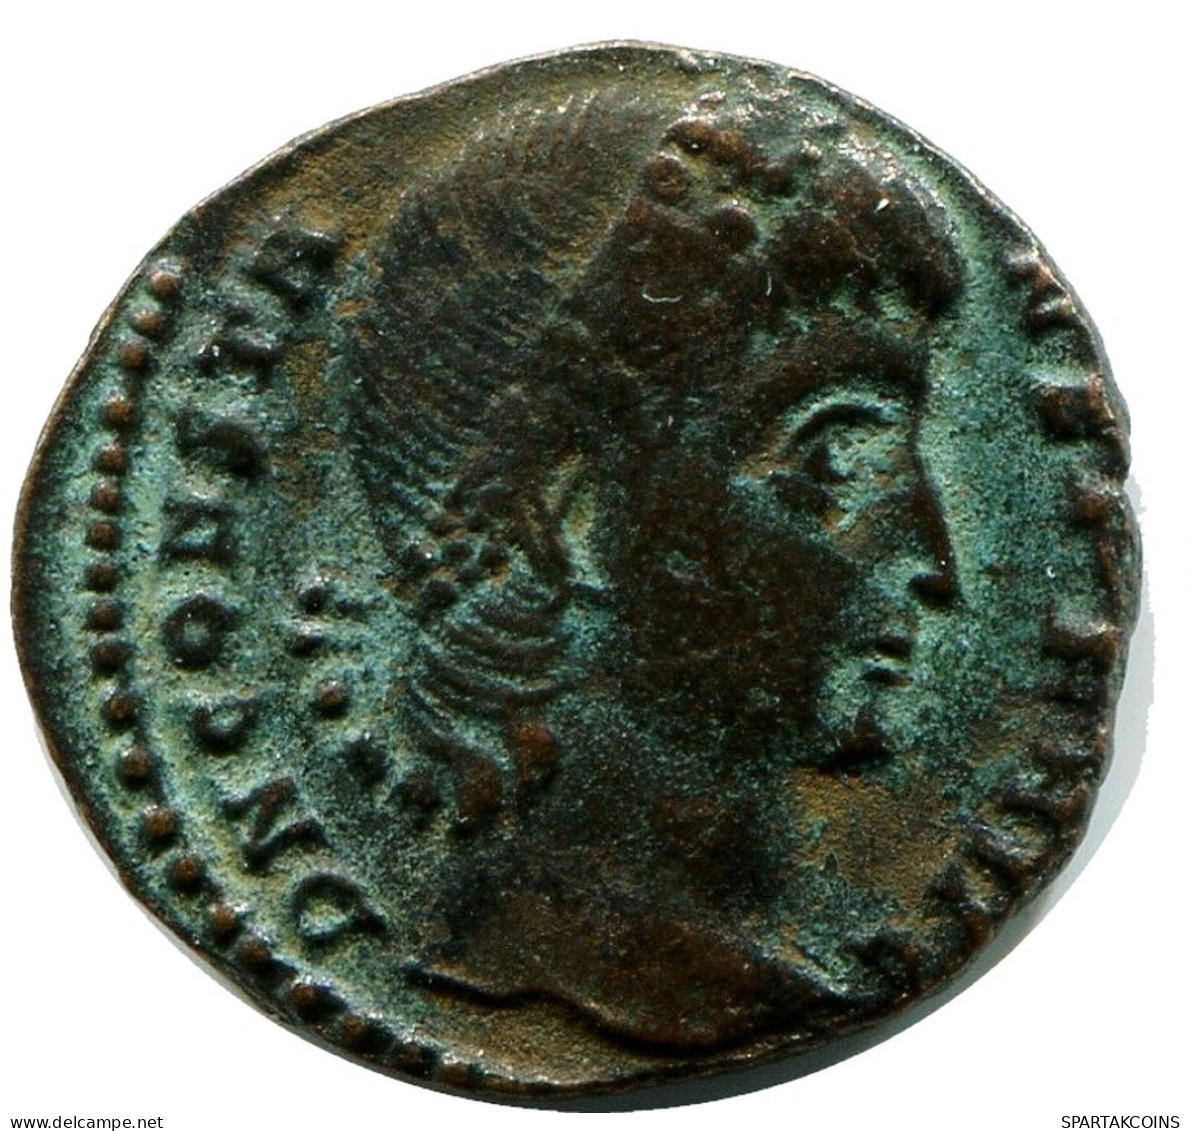 CONSTANS MINTED IN CONSTANTINOPLE FOUND IN IHNASYAH HOARD EGYPT #ANC11930.14.U.A - The Christian Empire (307 AD Tot 363 AD)